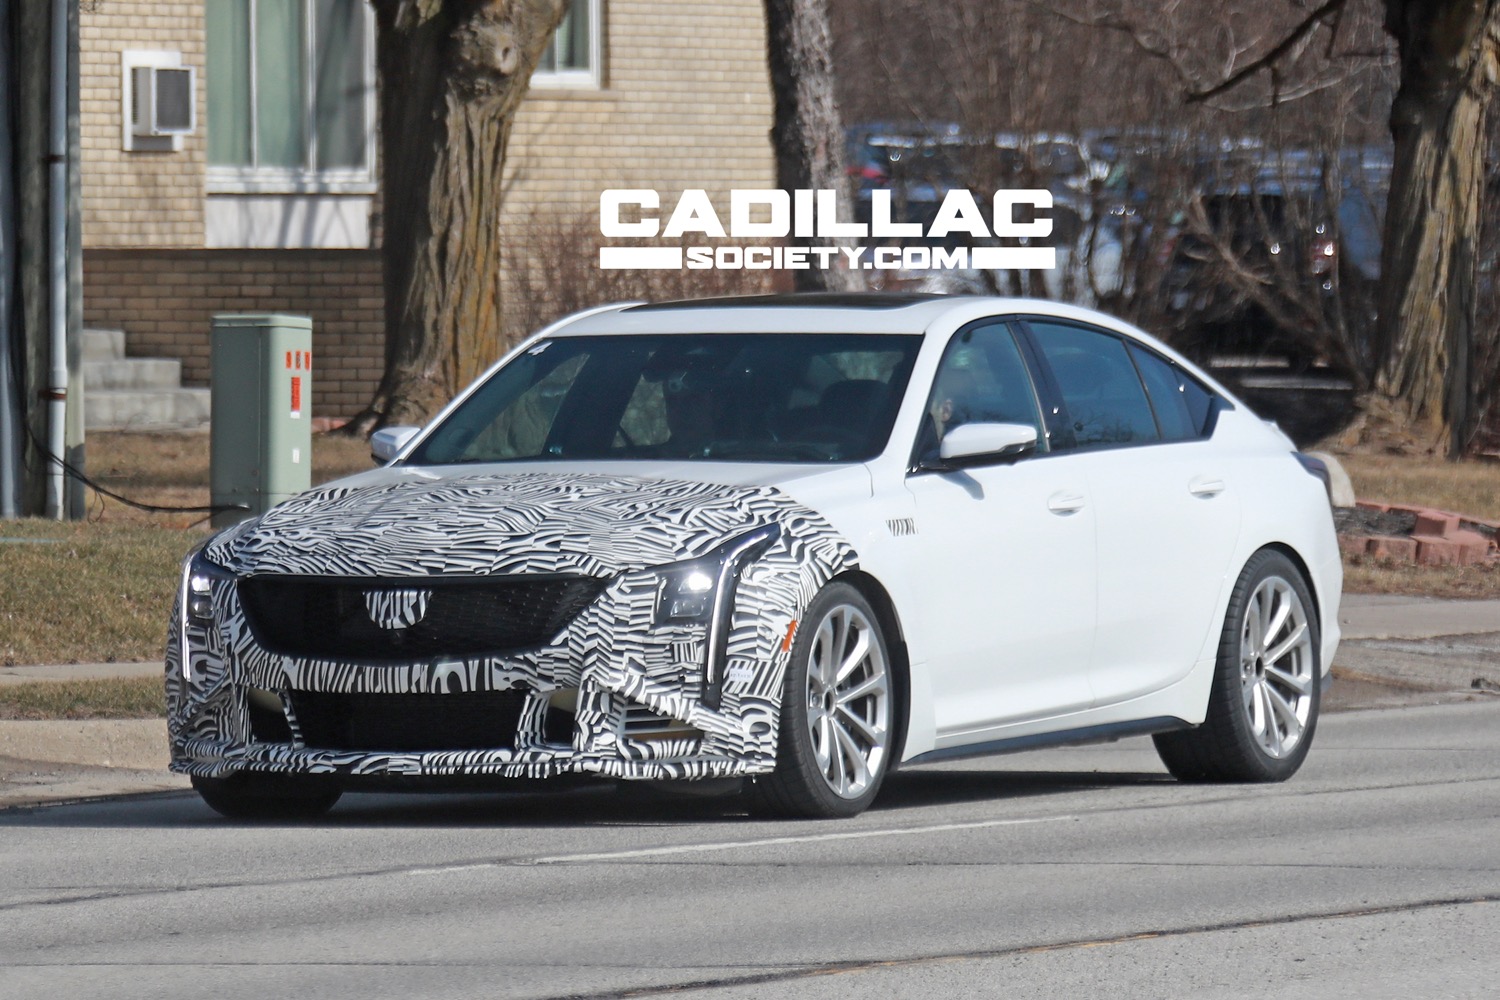 Cyber Yellow Among New 2024 Cadillac CT5V, CT5V Blackwing Colors